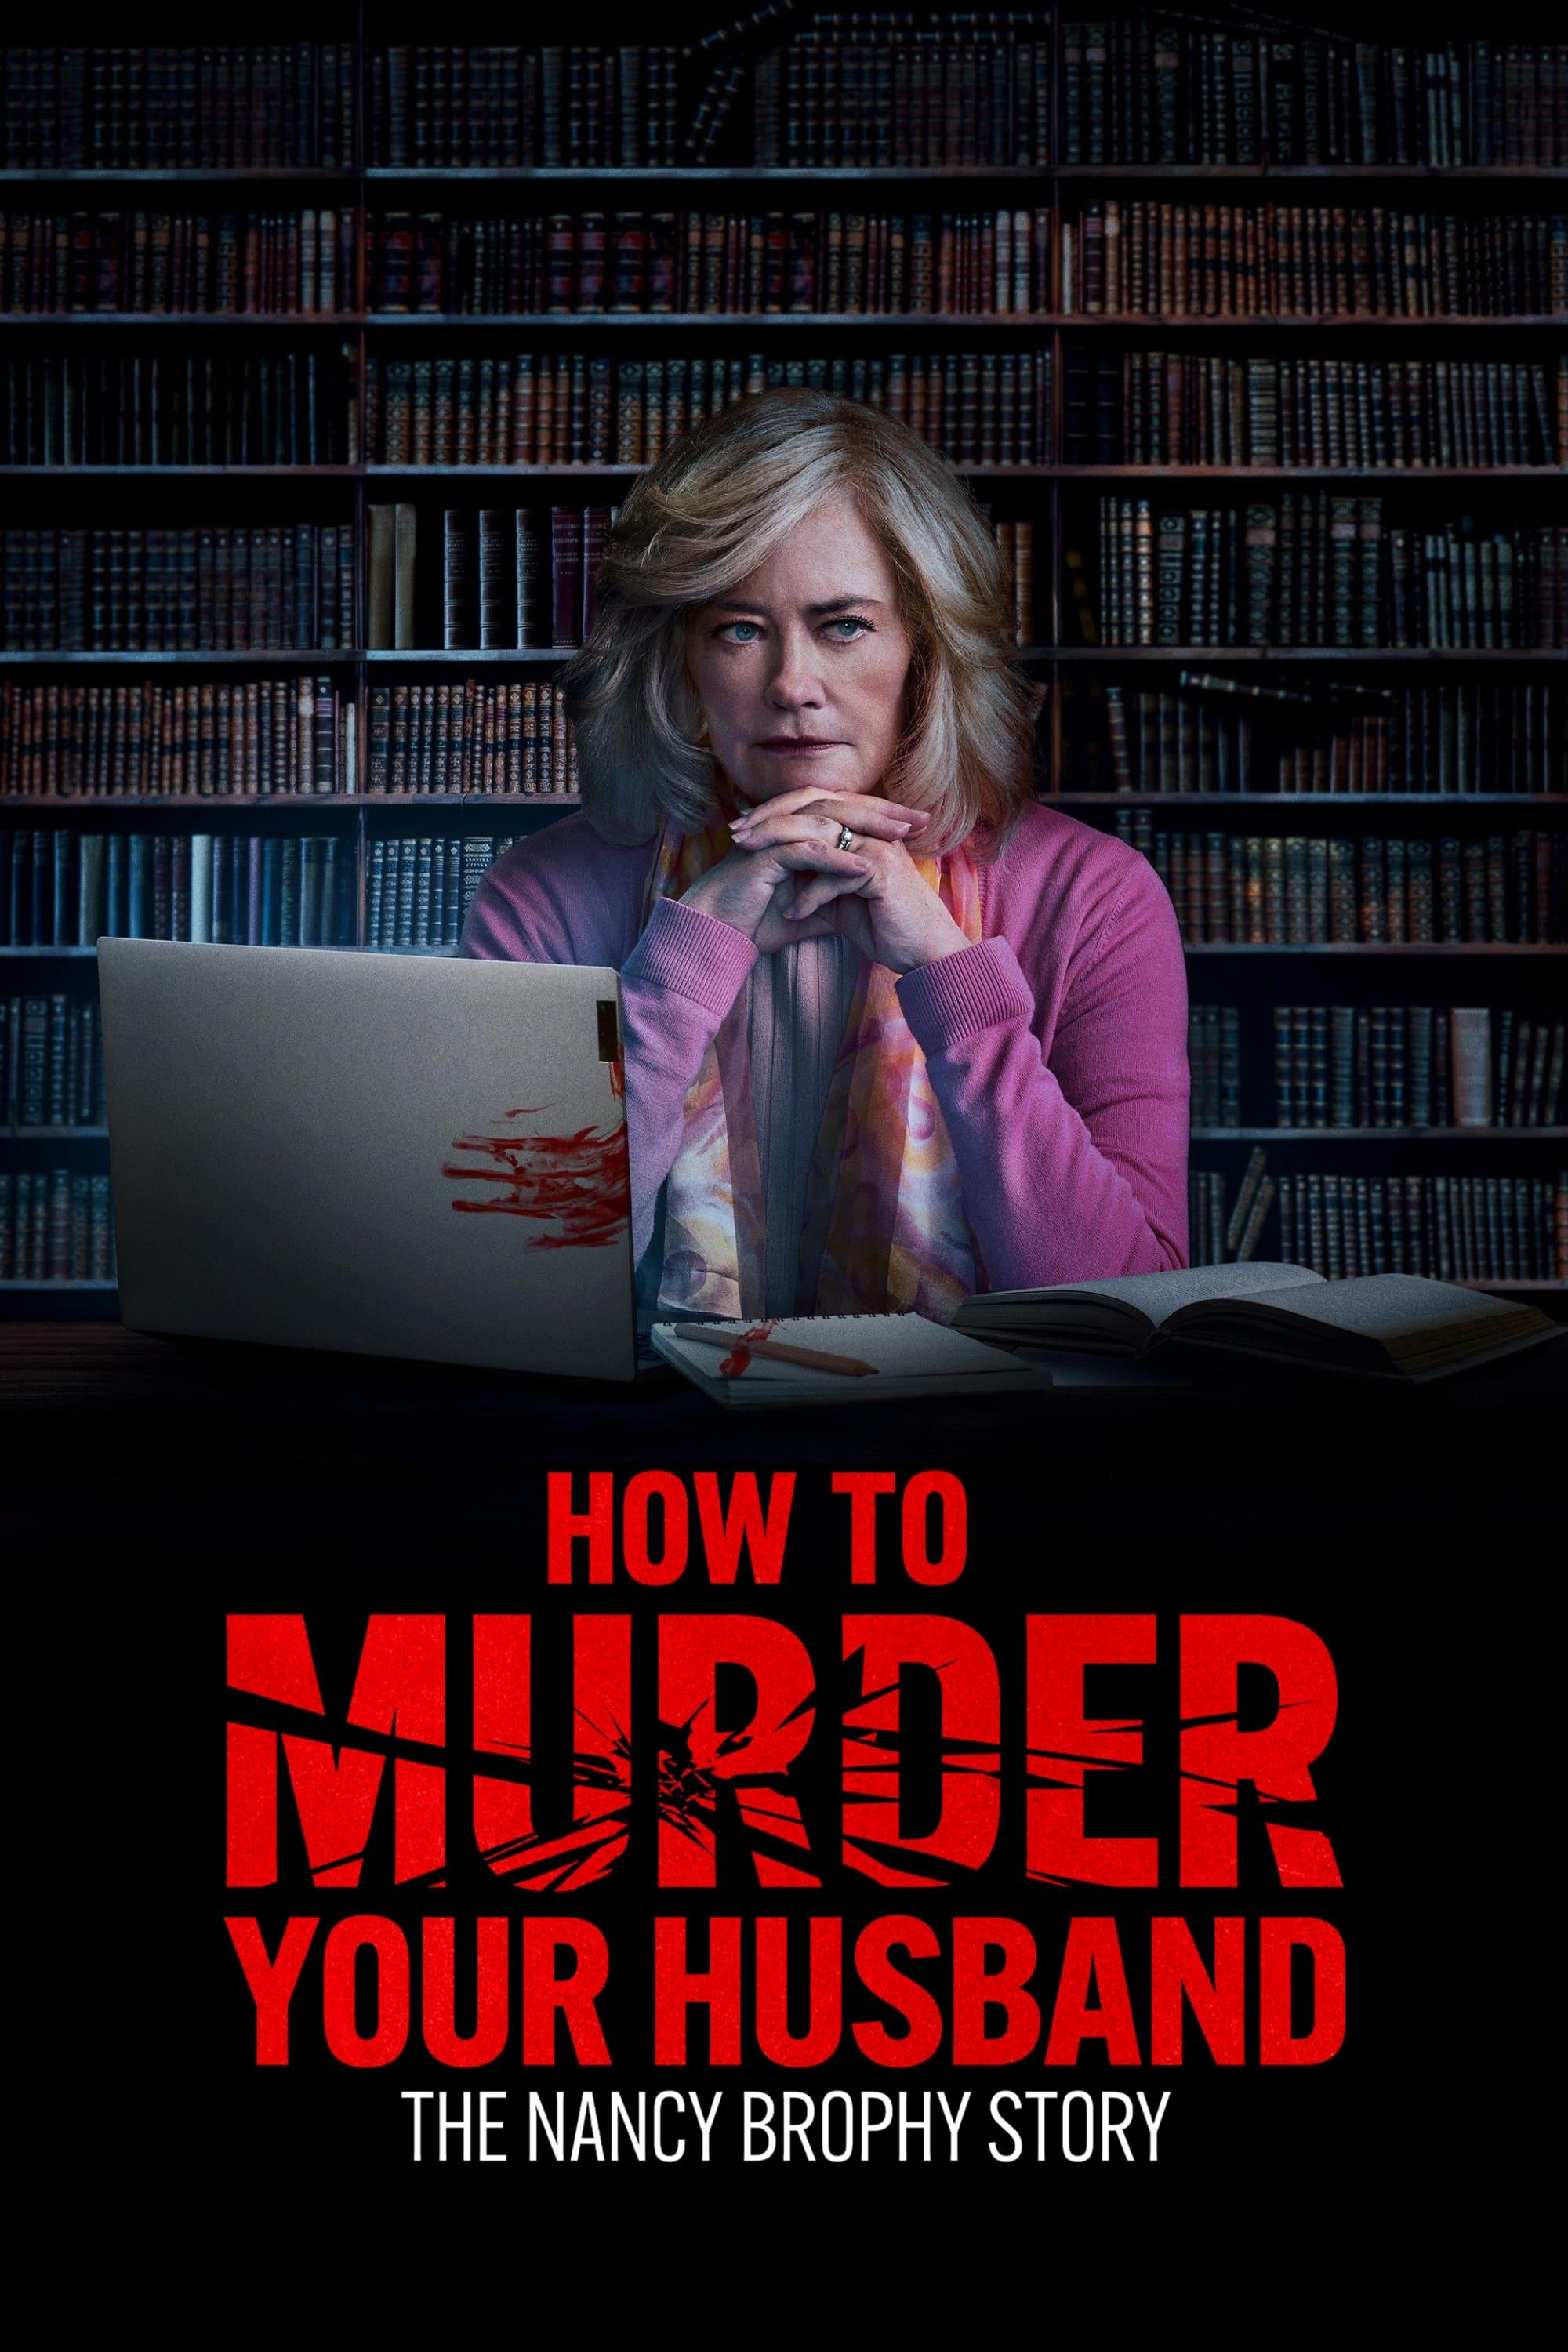 How to Murder Your Husband: The Nancy Brophy Story poster